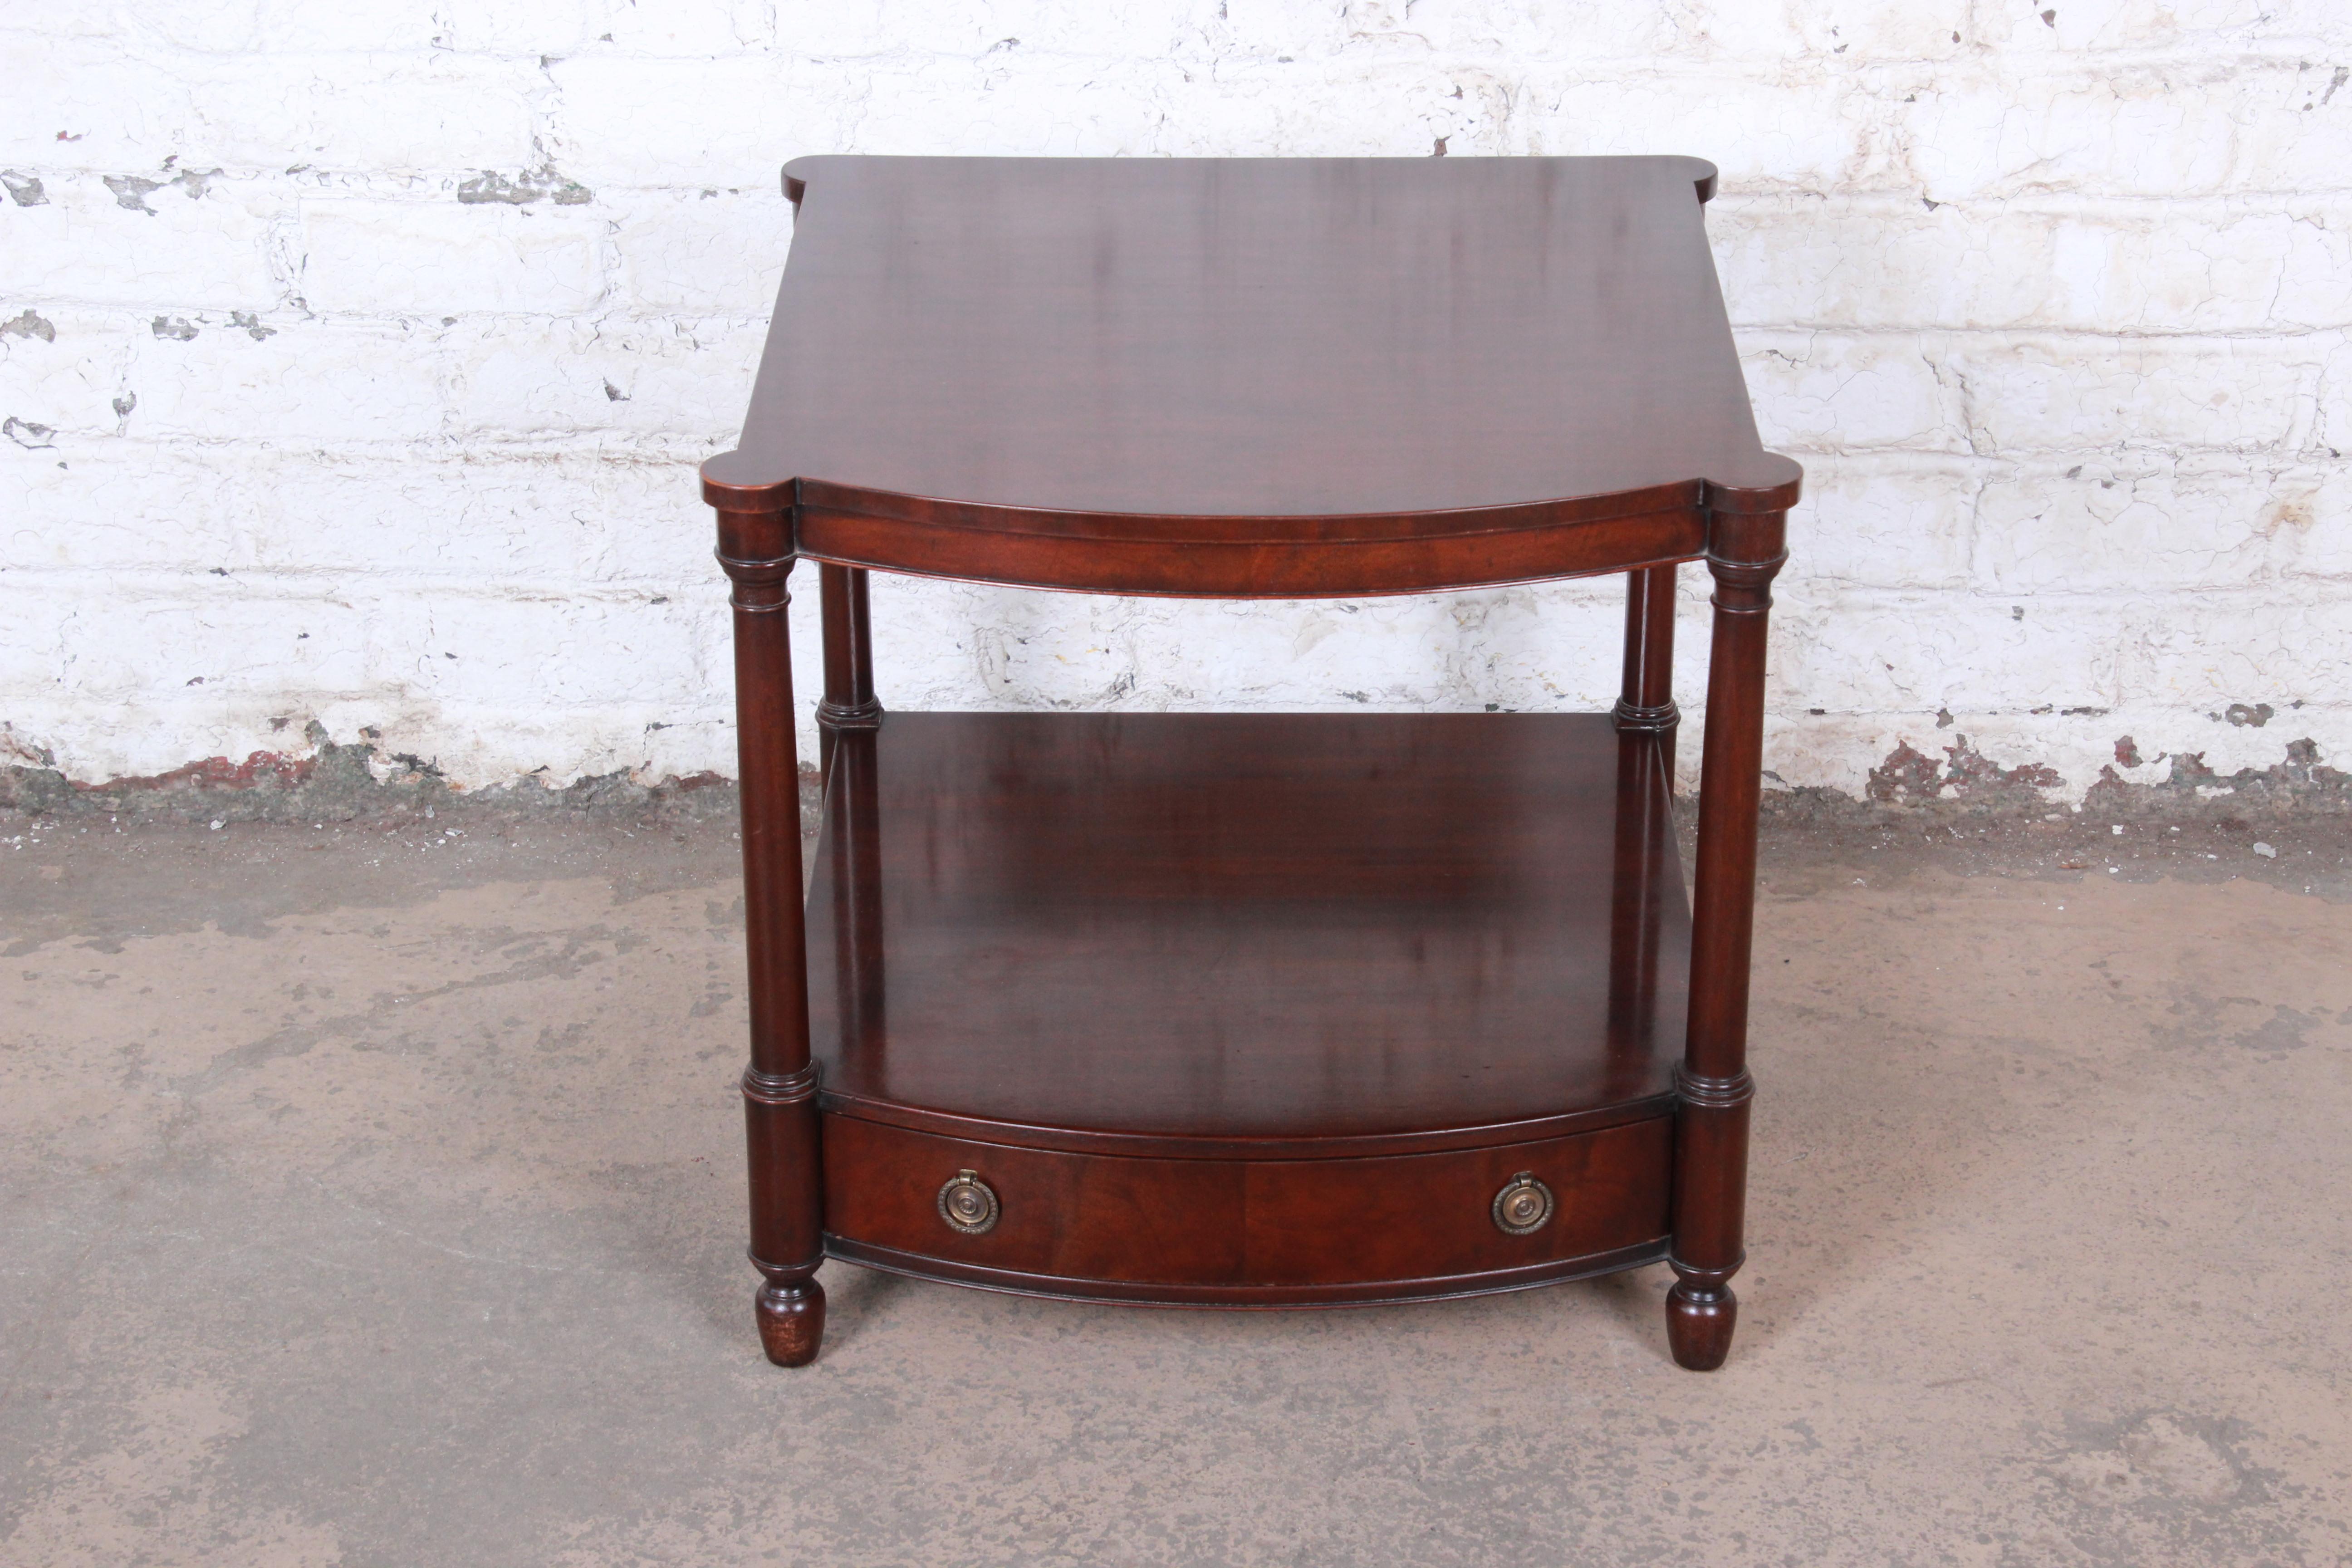 British Colonial Baker Furniture Mahogany Occasional Table or Nightstand, circa 1950s